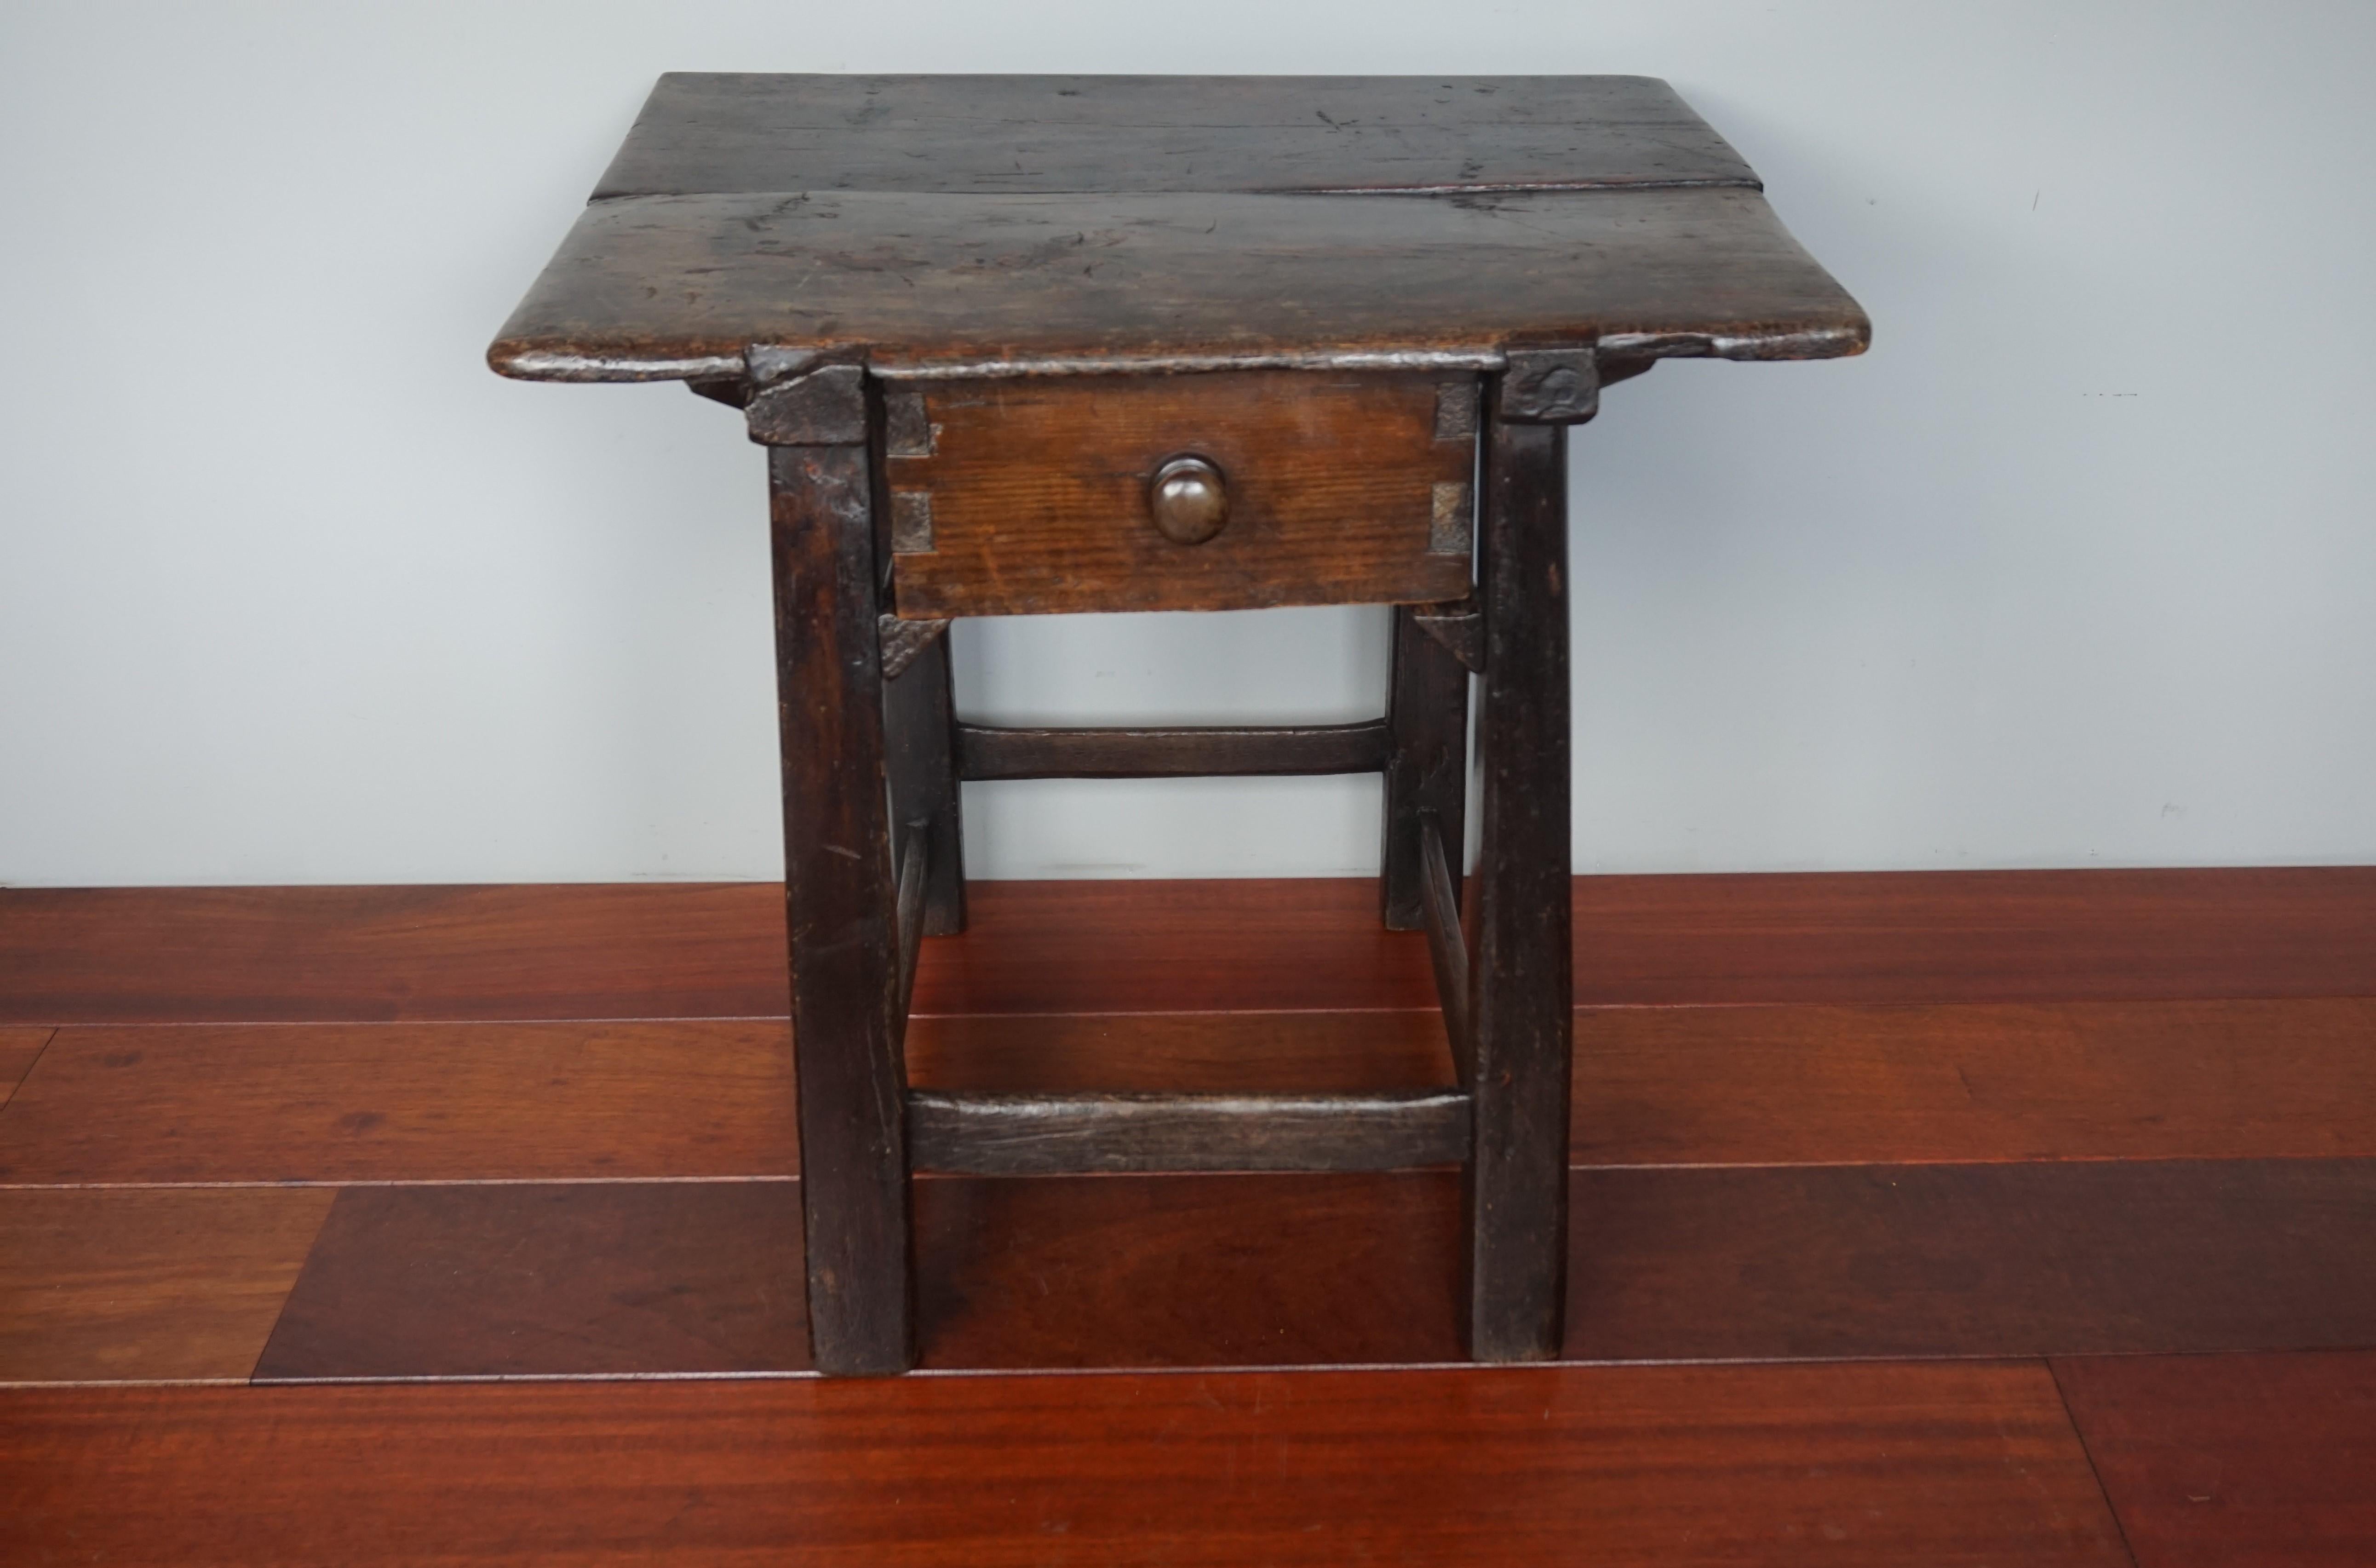 Antique and Rustic Early 1700s Wooden Spanish Countryside Pay Table with Drawer 12